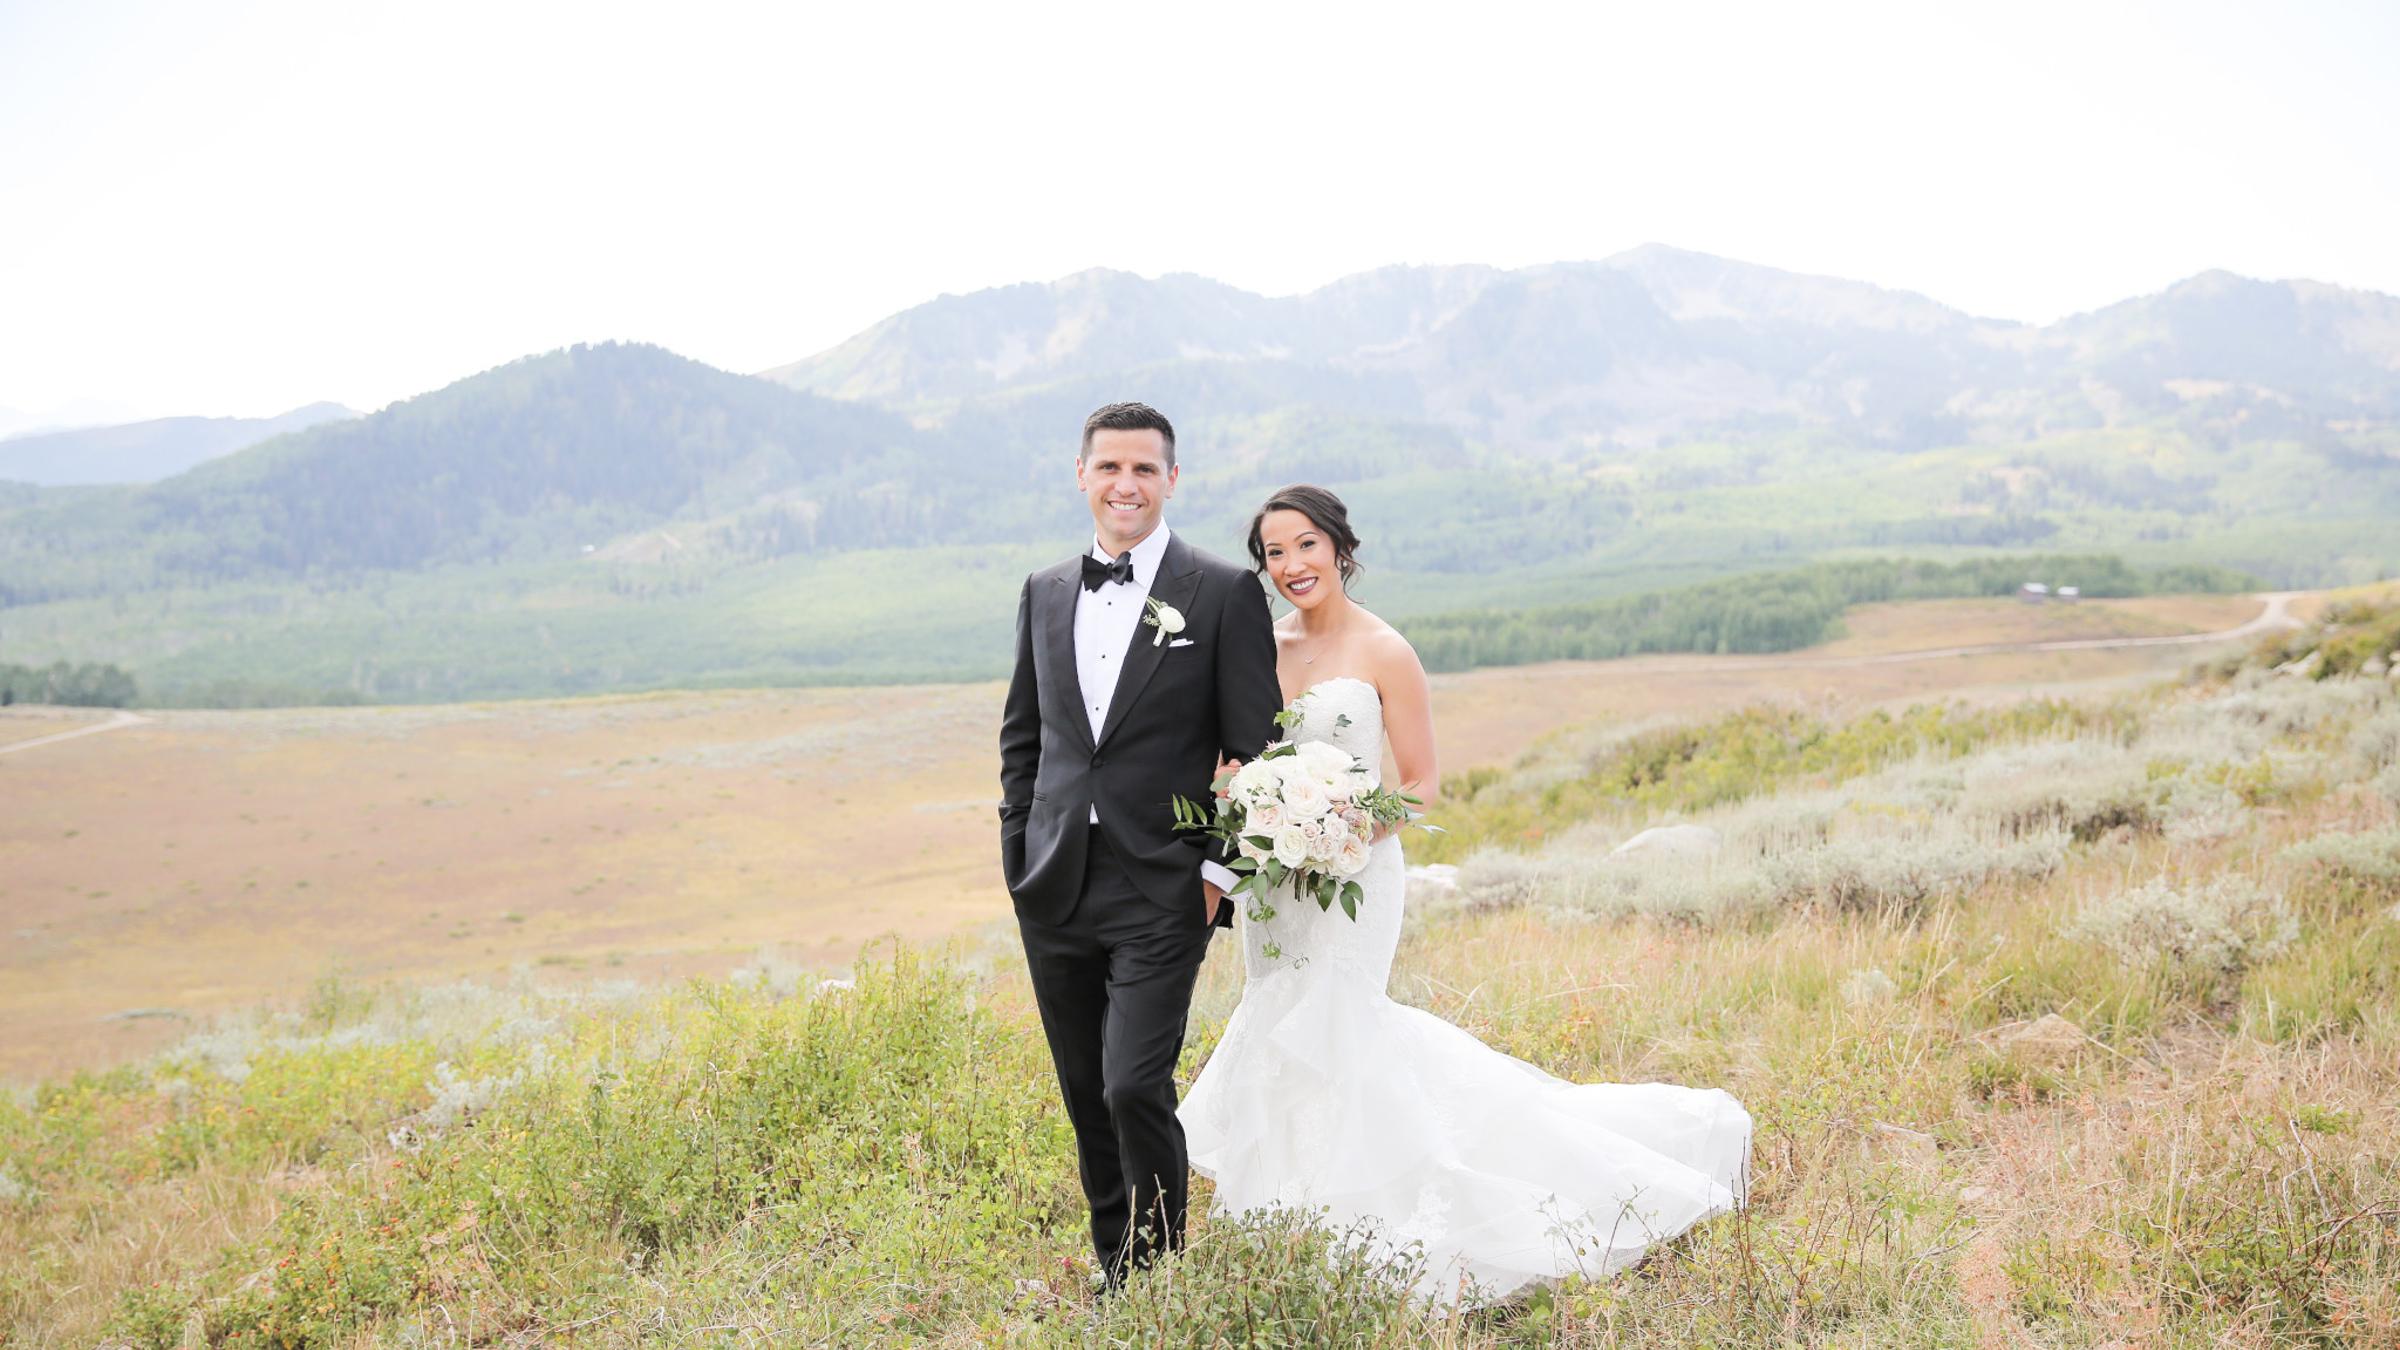 A bride and groom smiling on top of a mountain